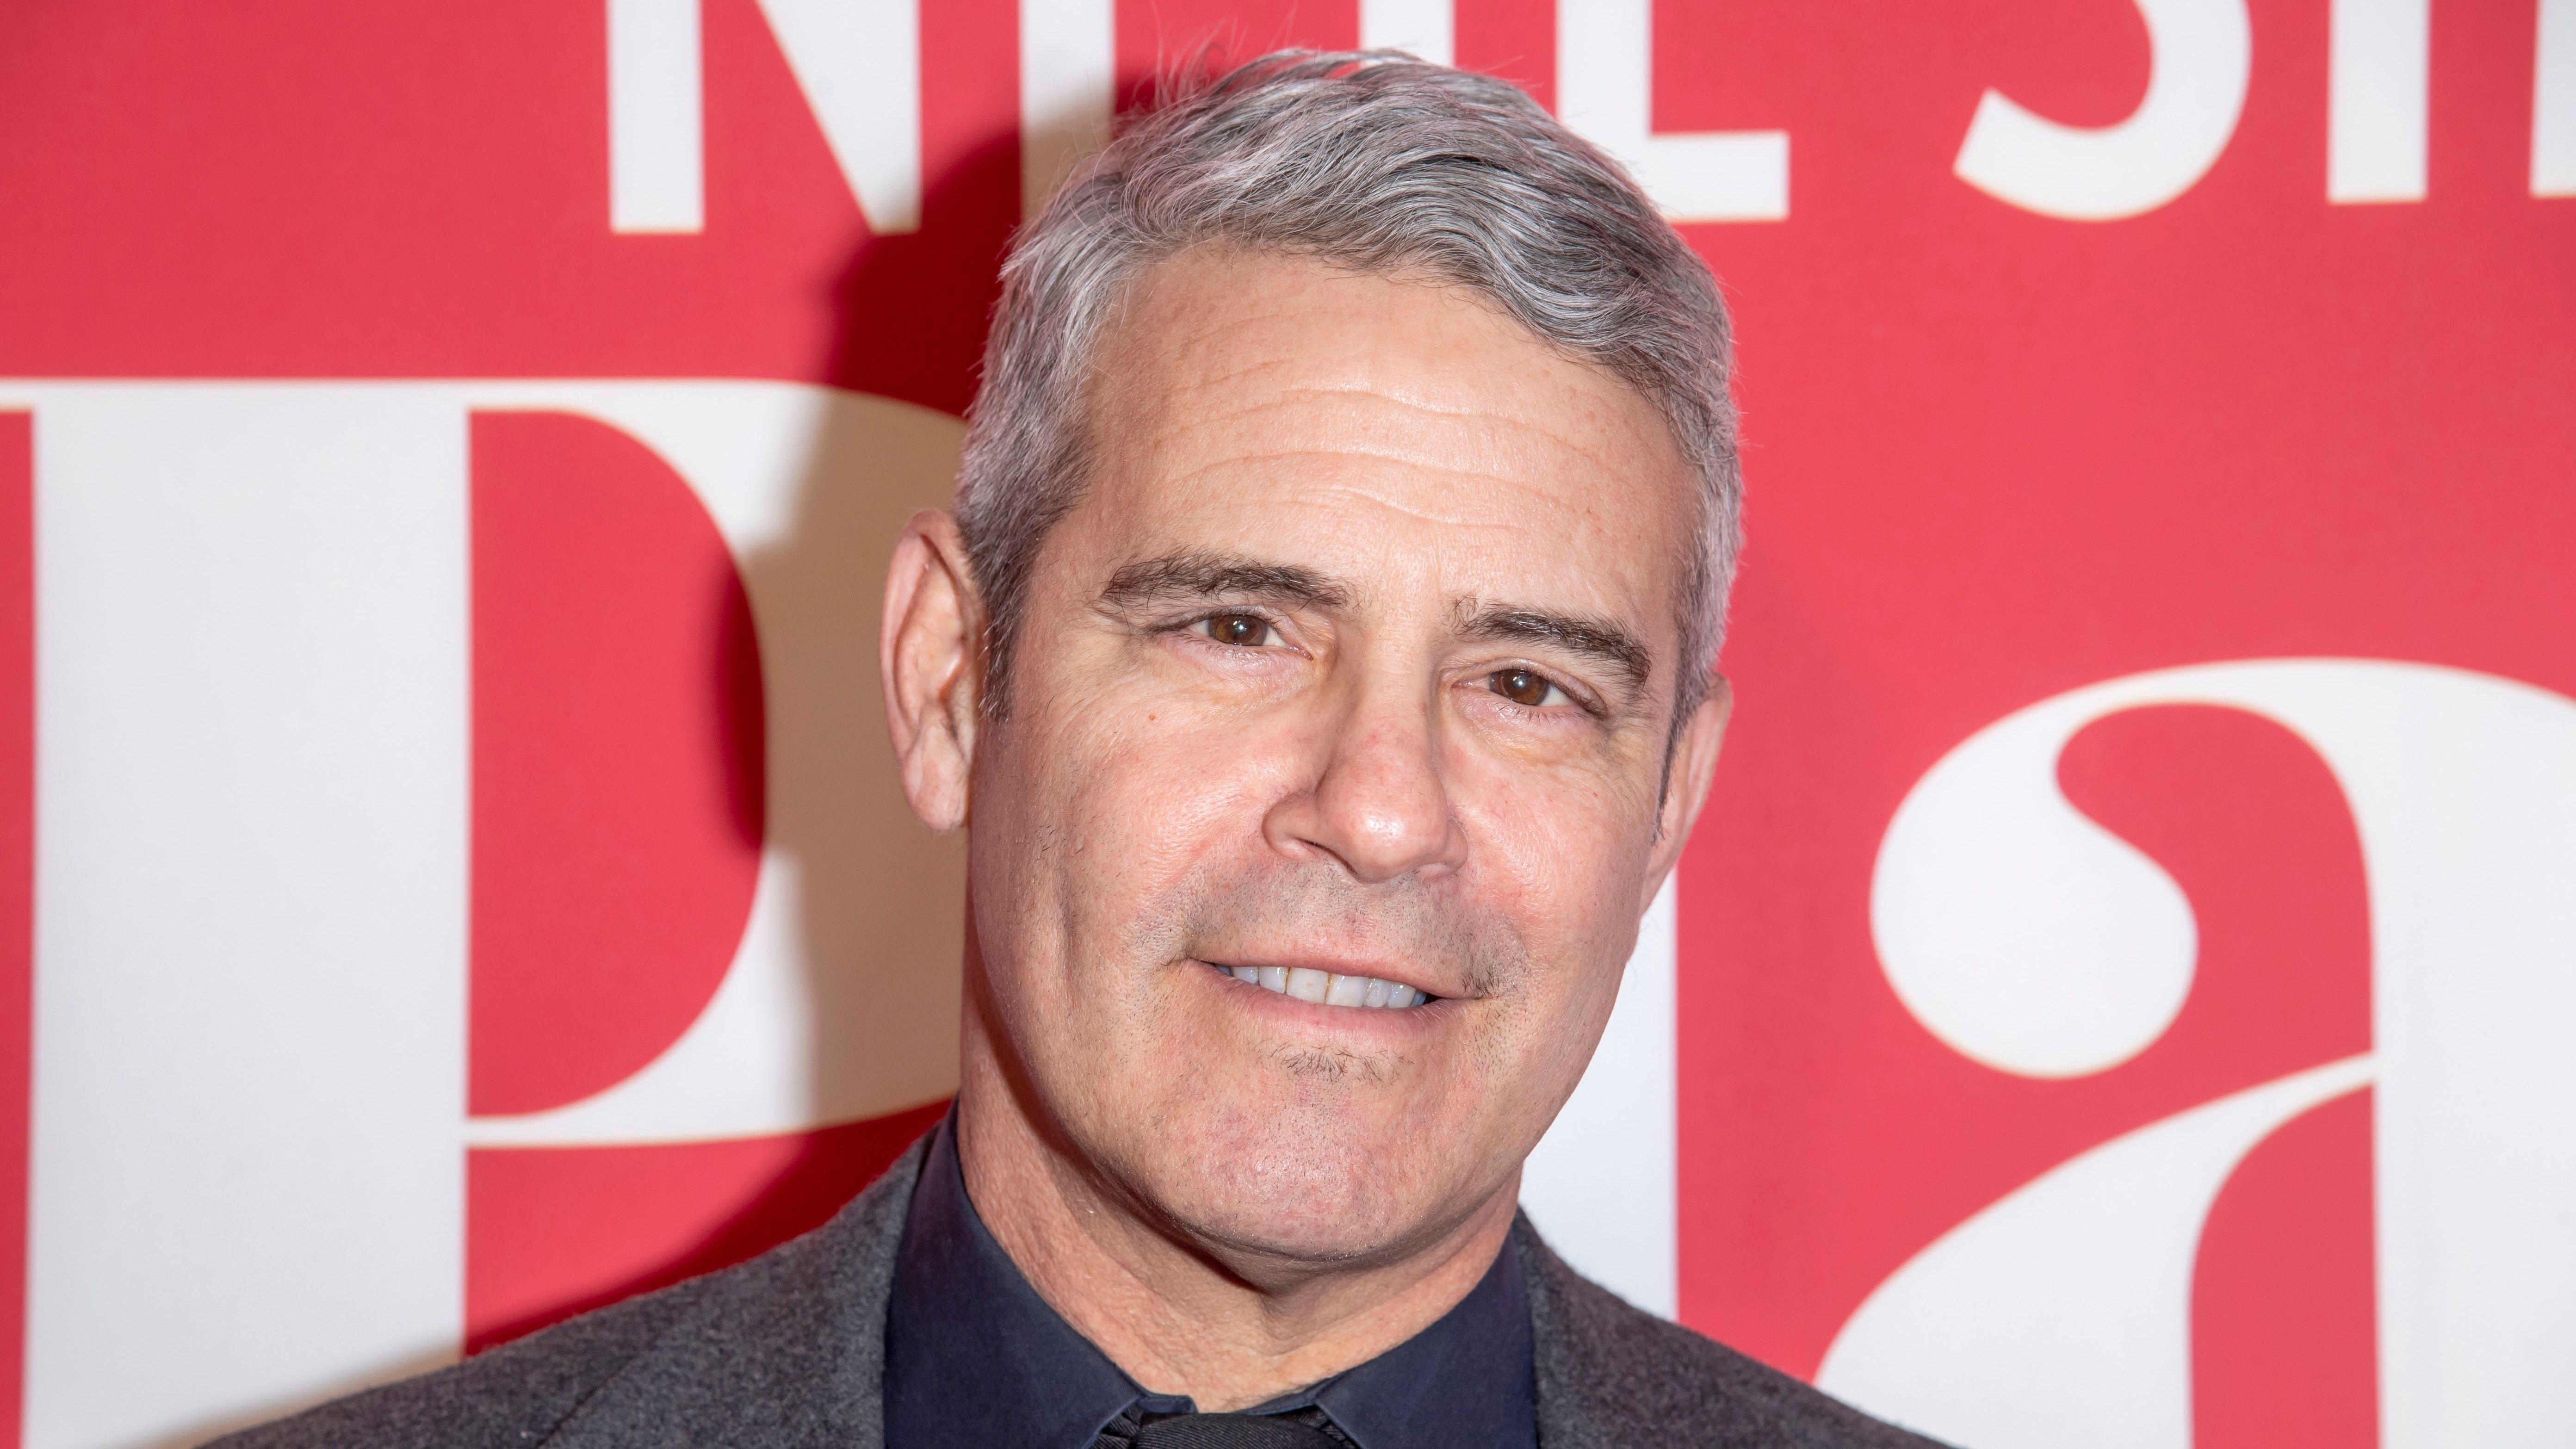 Andy Cohen smiles in navy shirt and gray blazer